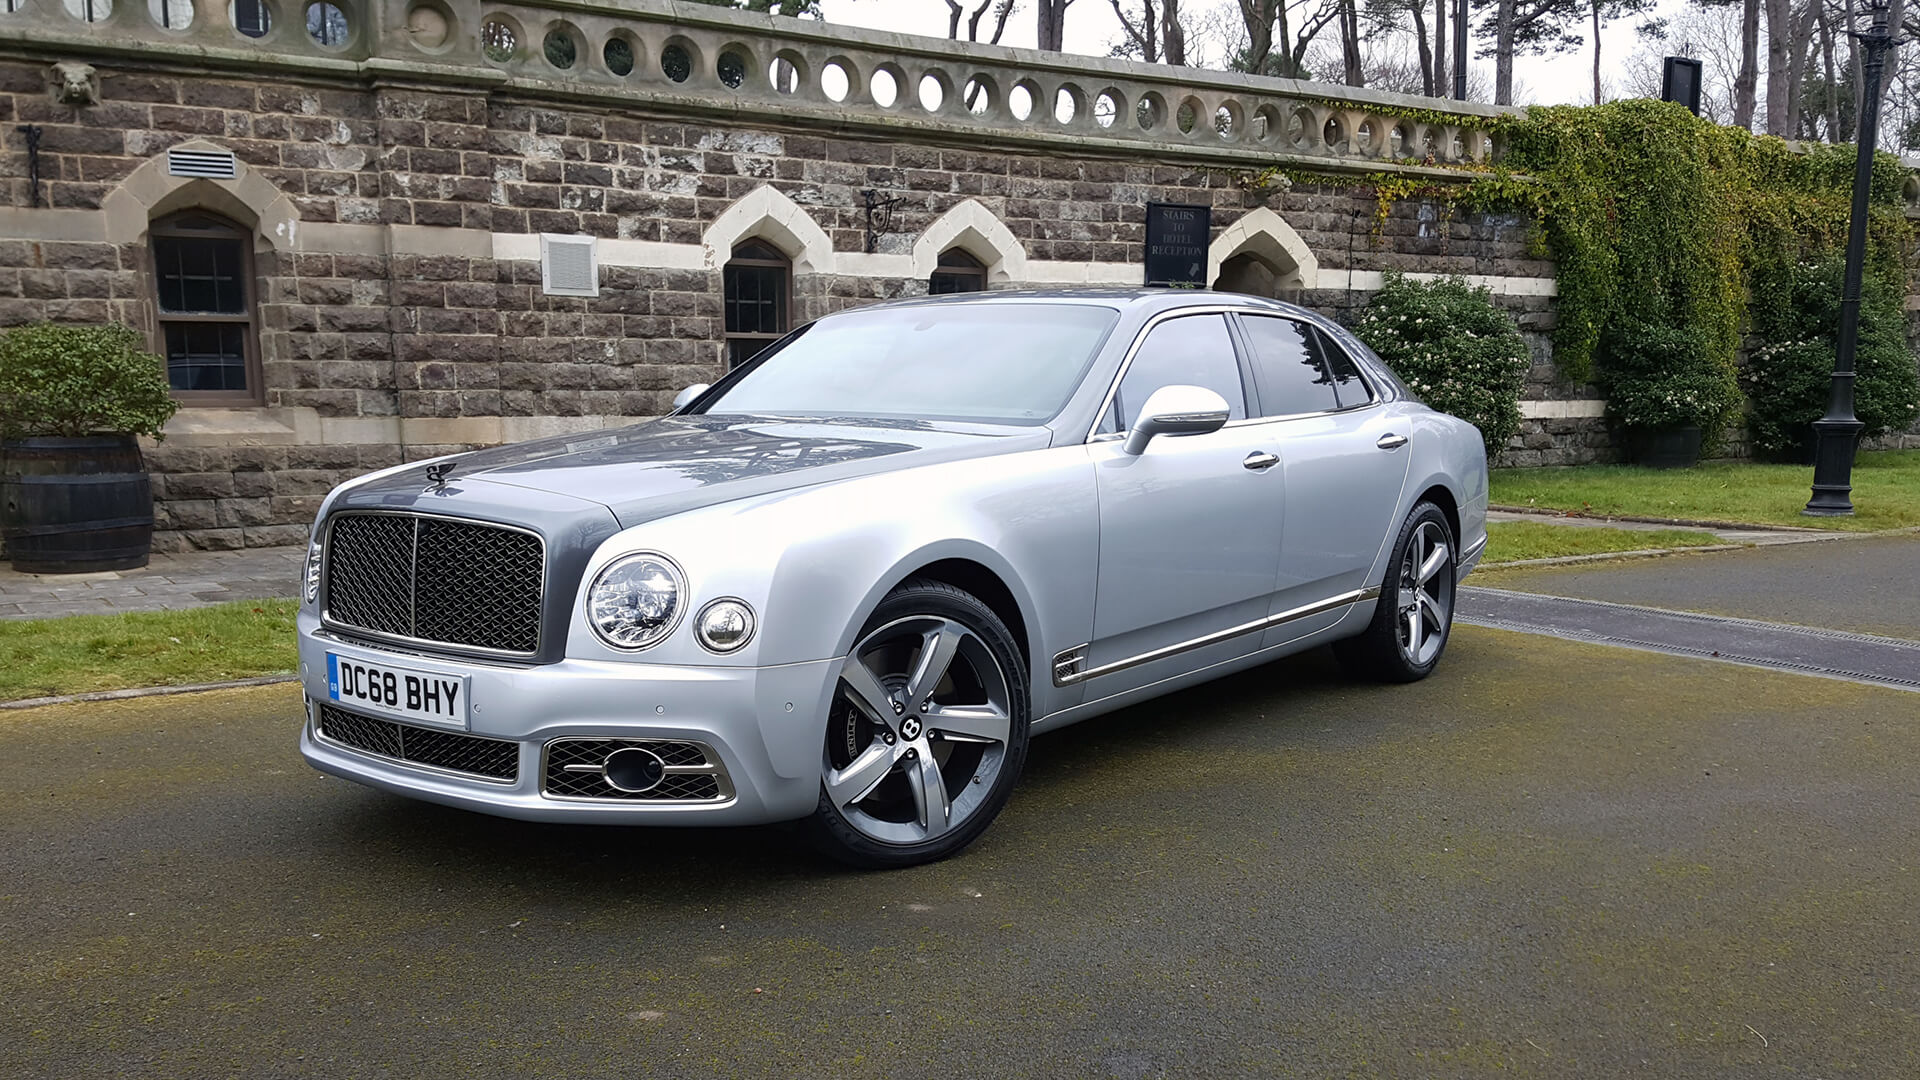 Bentley Mulsanne Speed Road Test Review: The Lap of Luxury – GTPlanet